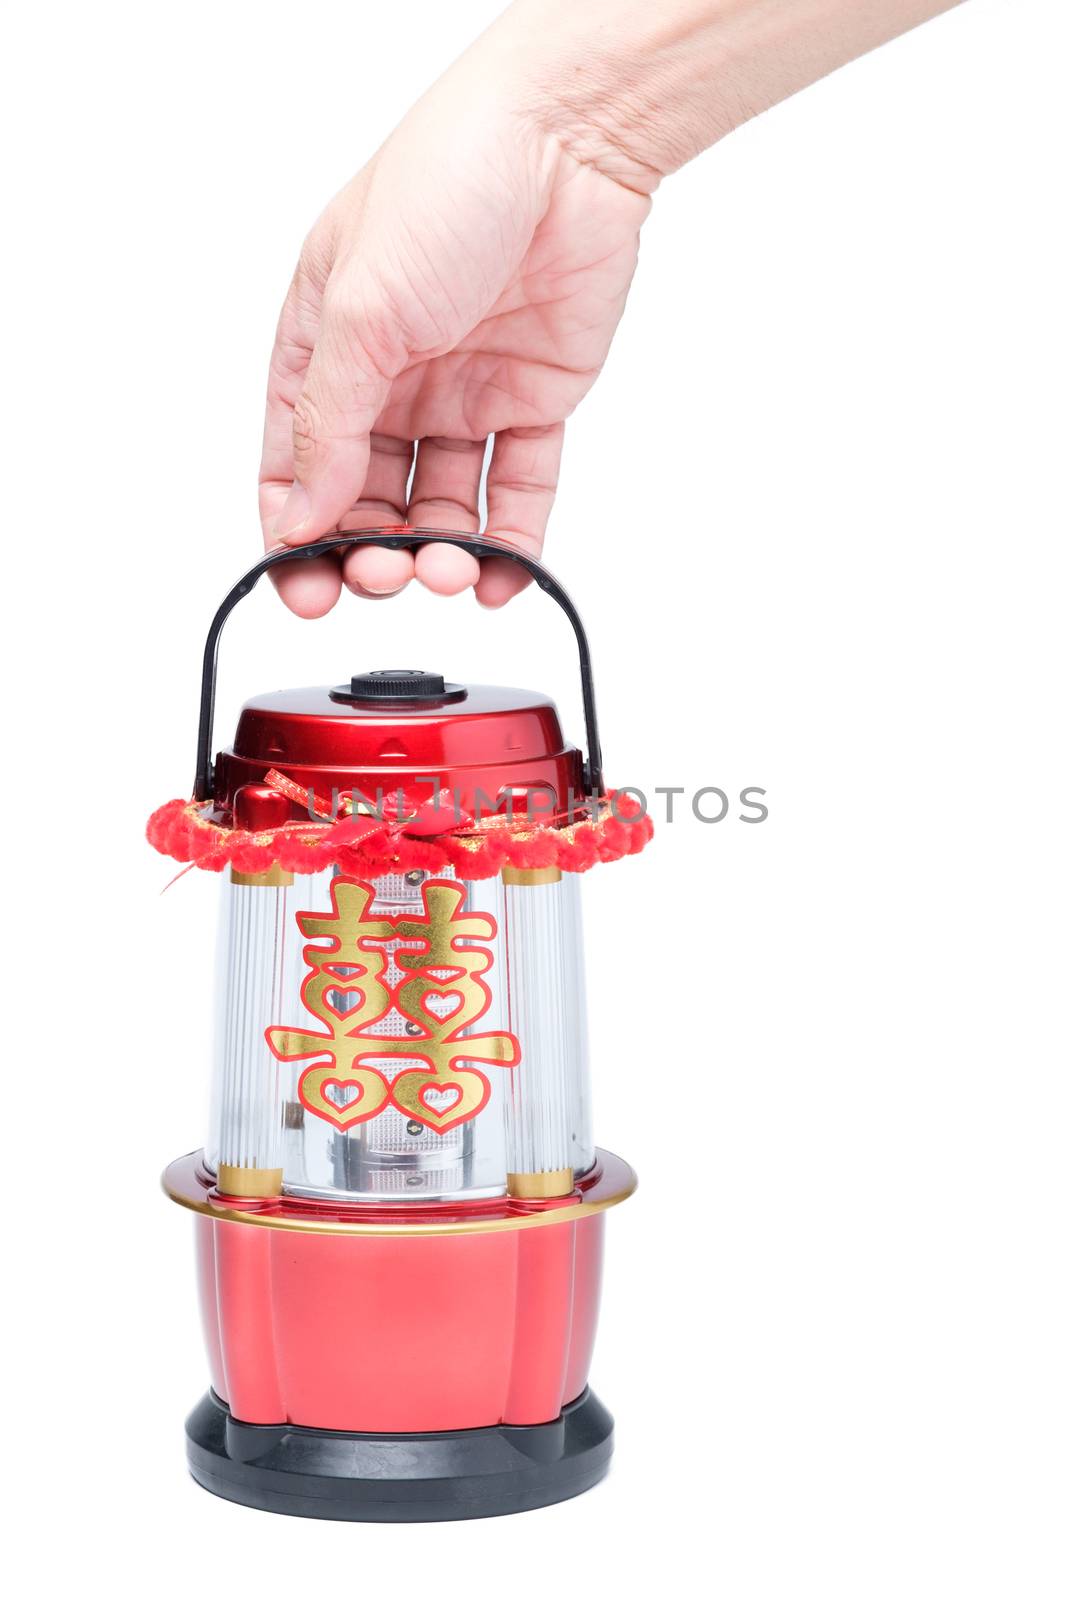 Hand holding Chinese LED lantern lamp with Chinese double happin by zneb076